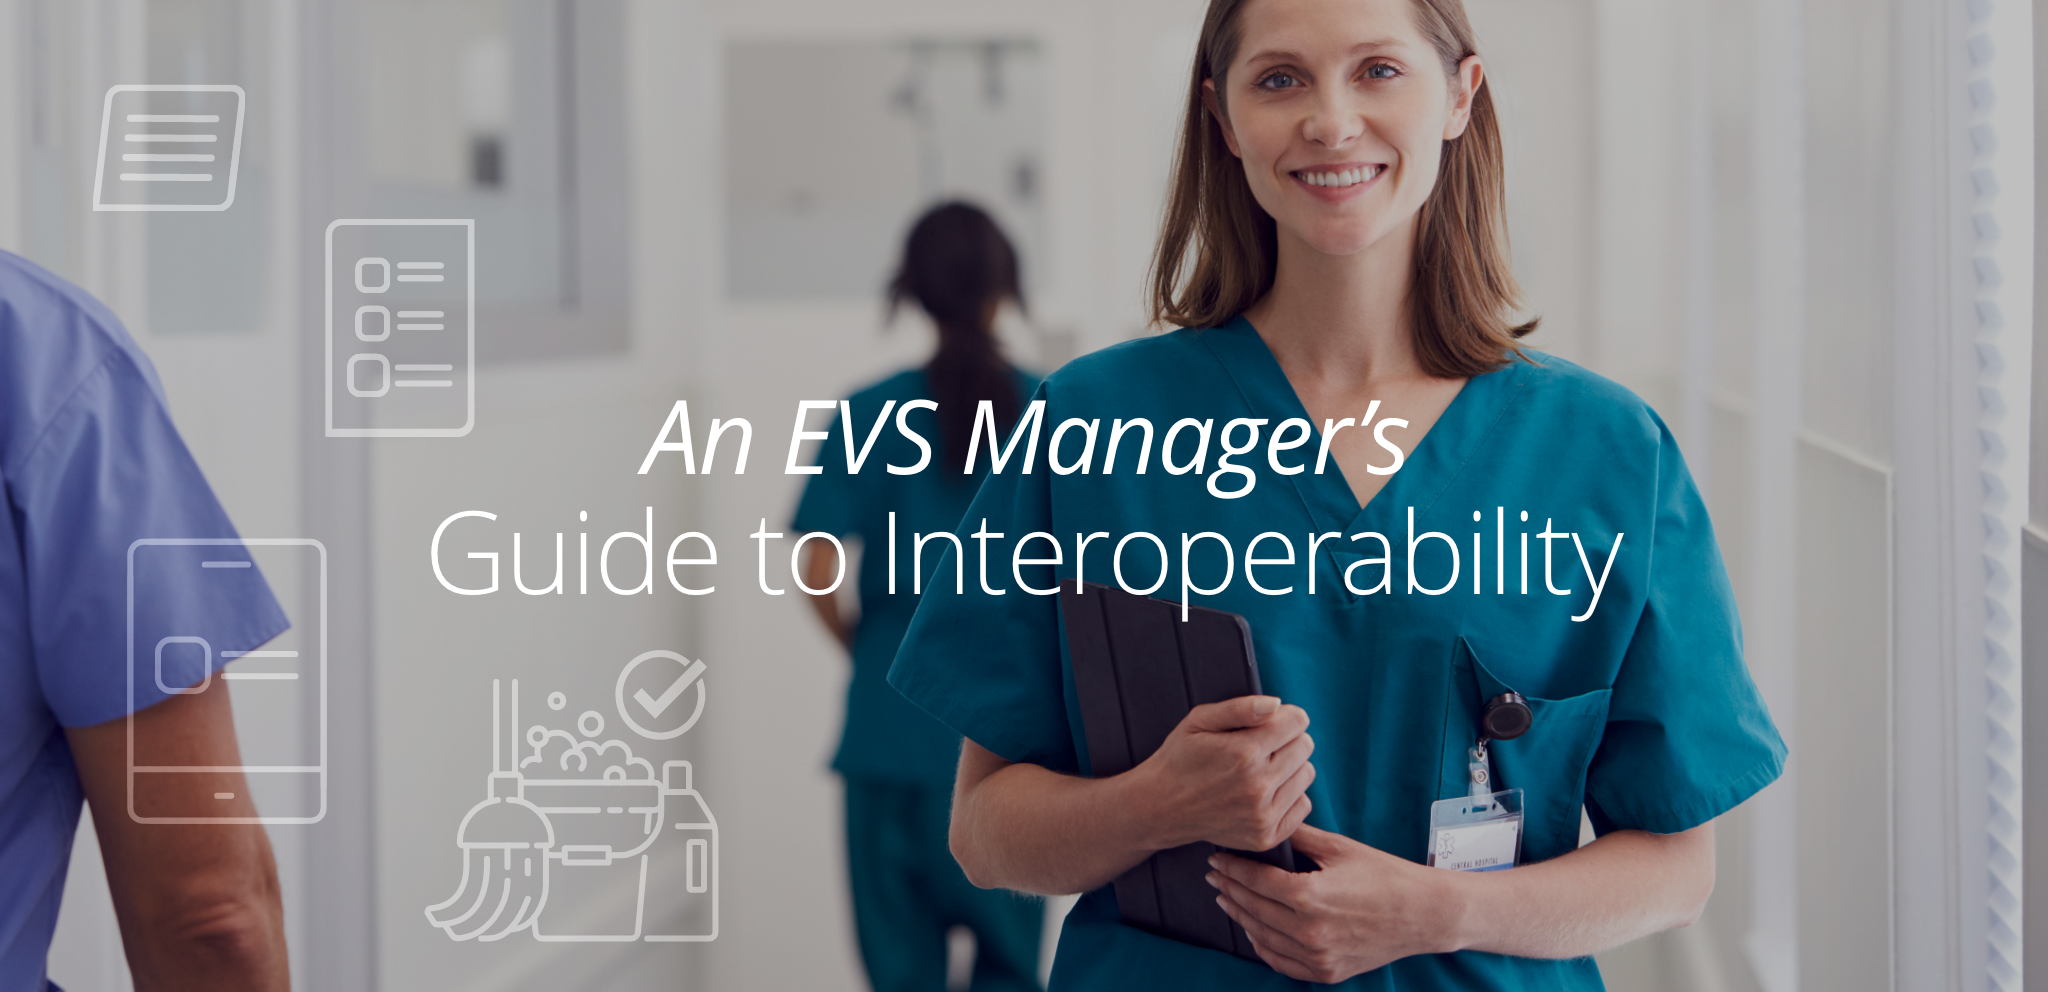 An EVS Manager's Guide to Interoperability